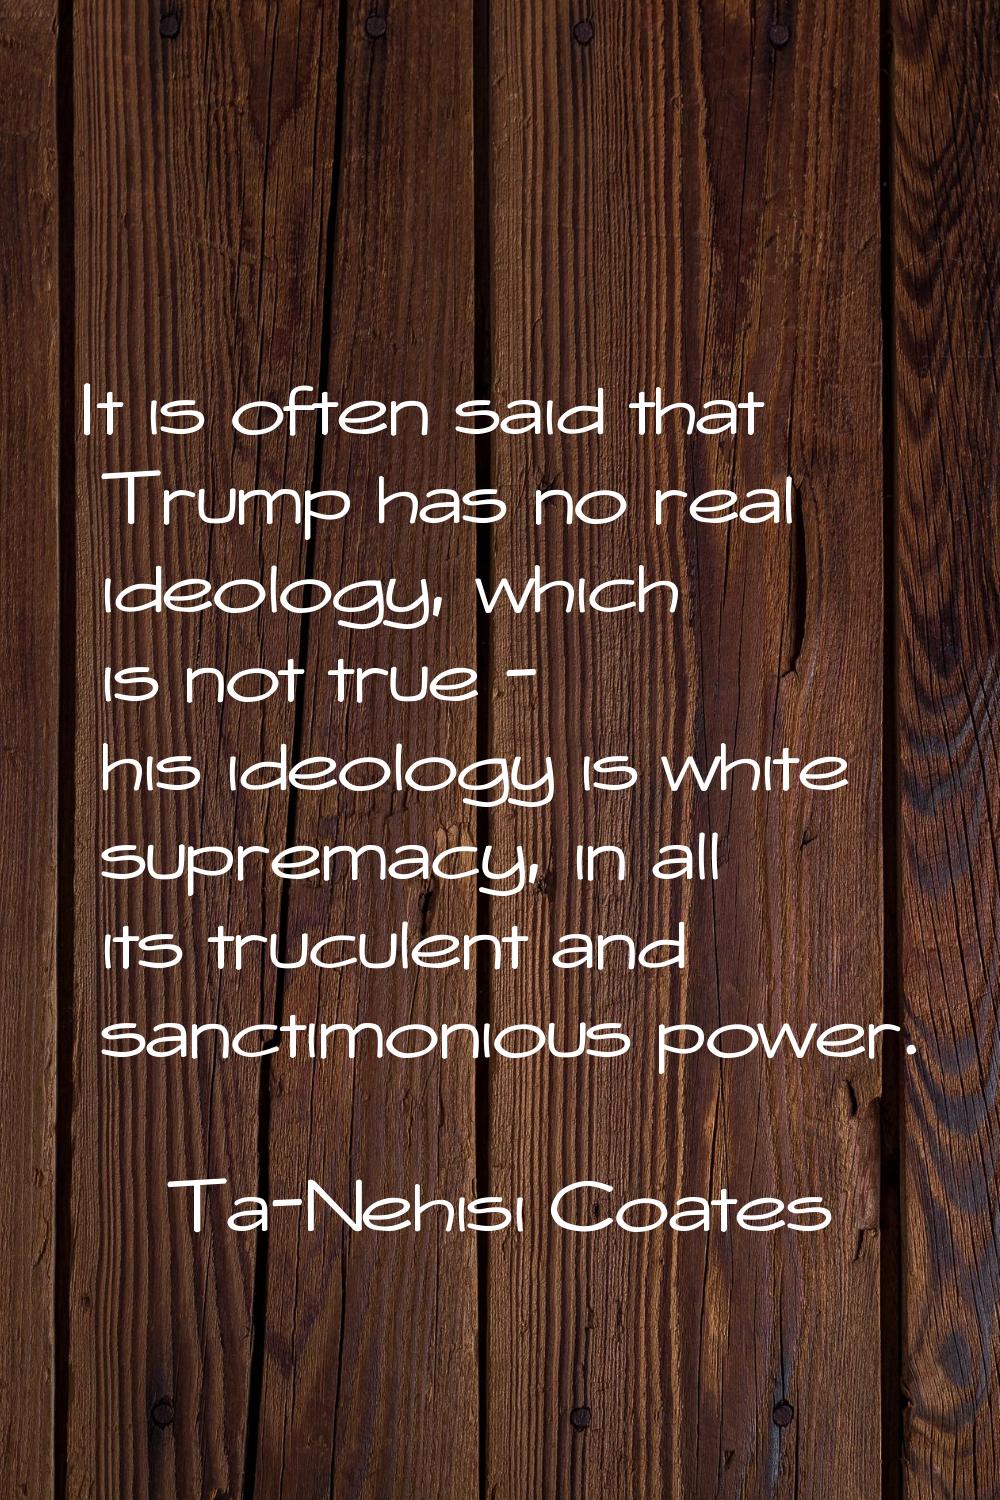 It is often said that Trump has no real ideology, which is not true - his ideology is white suprema